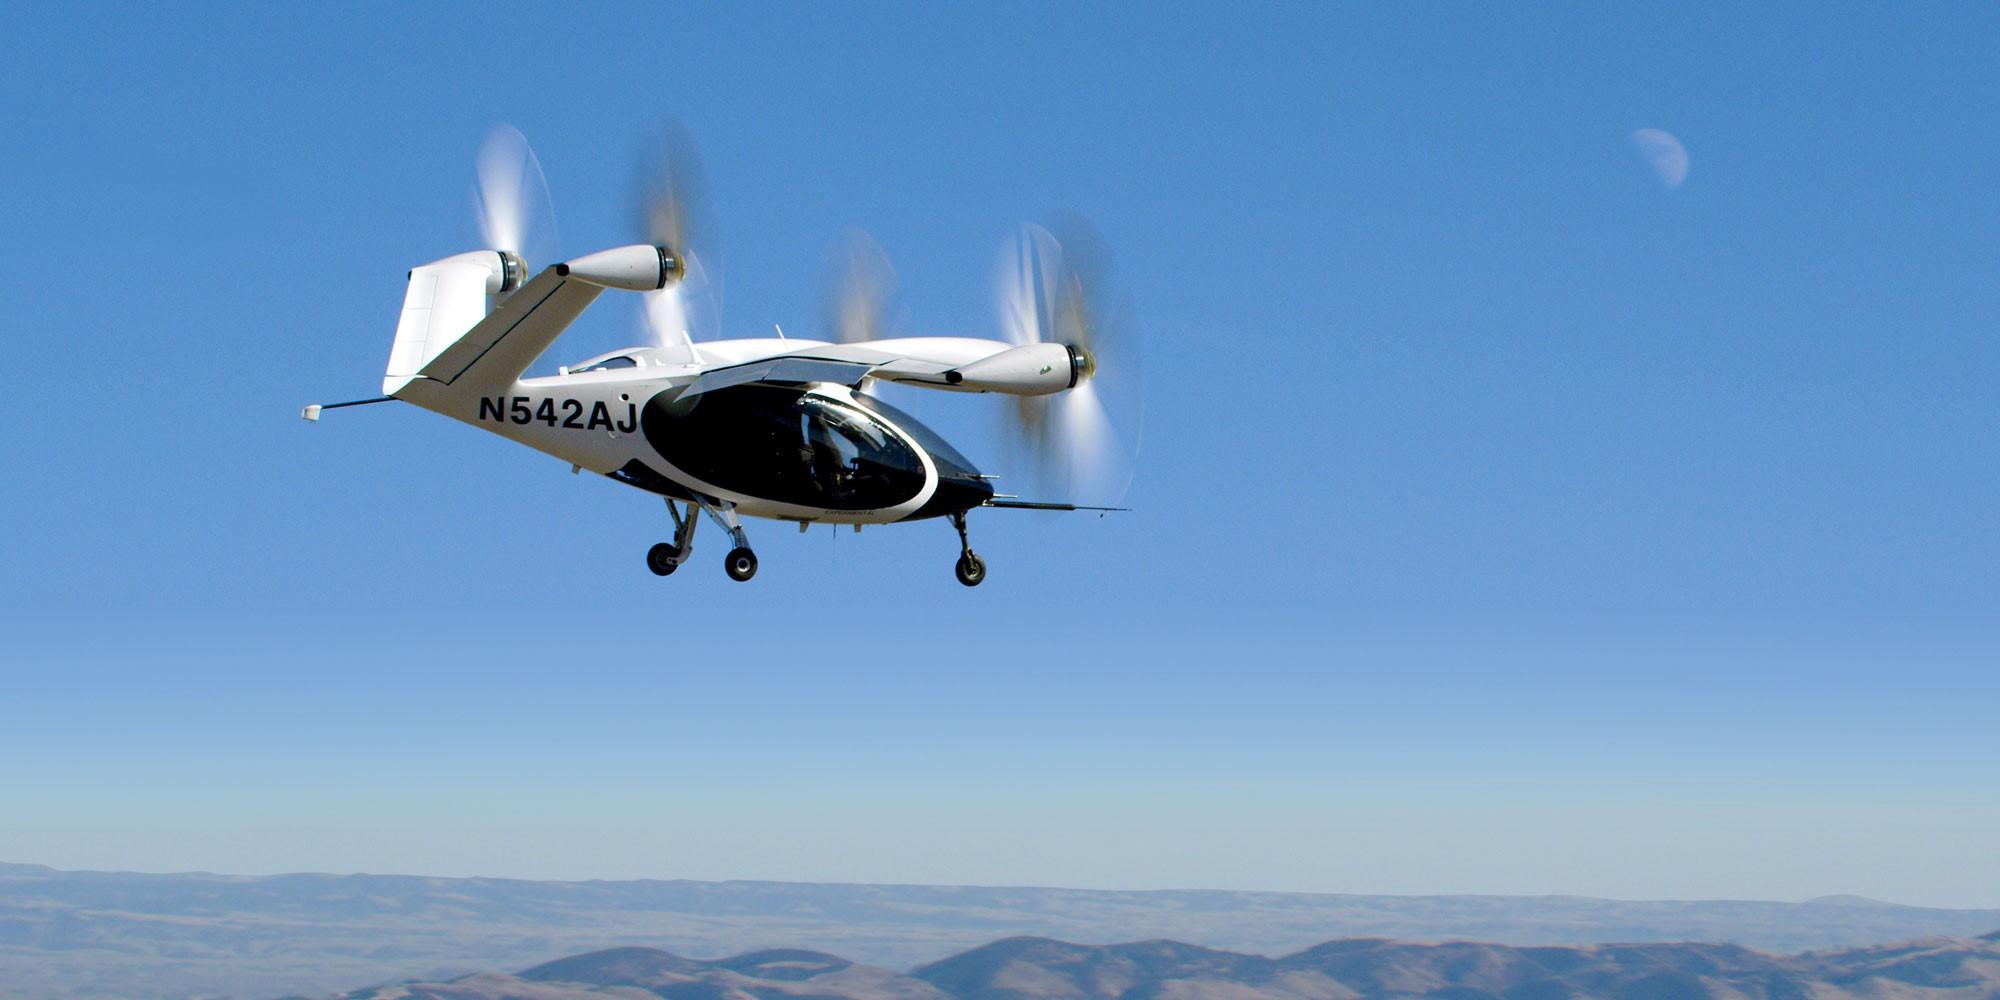 Joby Aviation is one of several front runners in the race to launch air taxi services with eVTOL aircraft in cities such as Los Angeles.